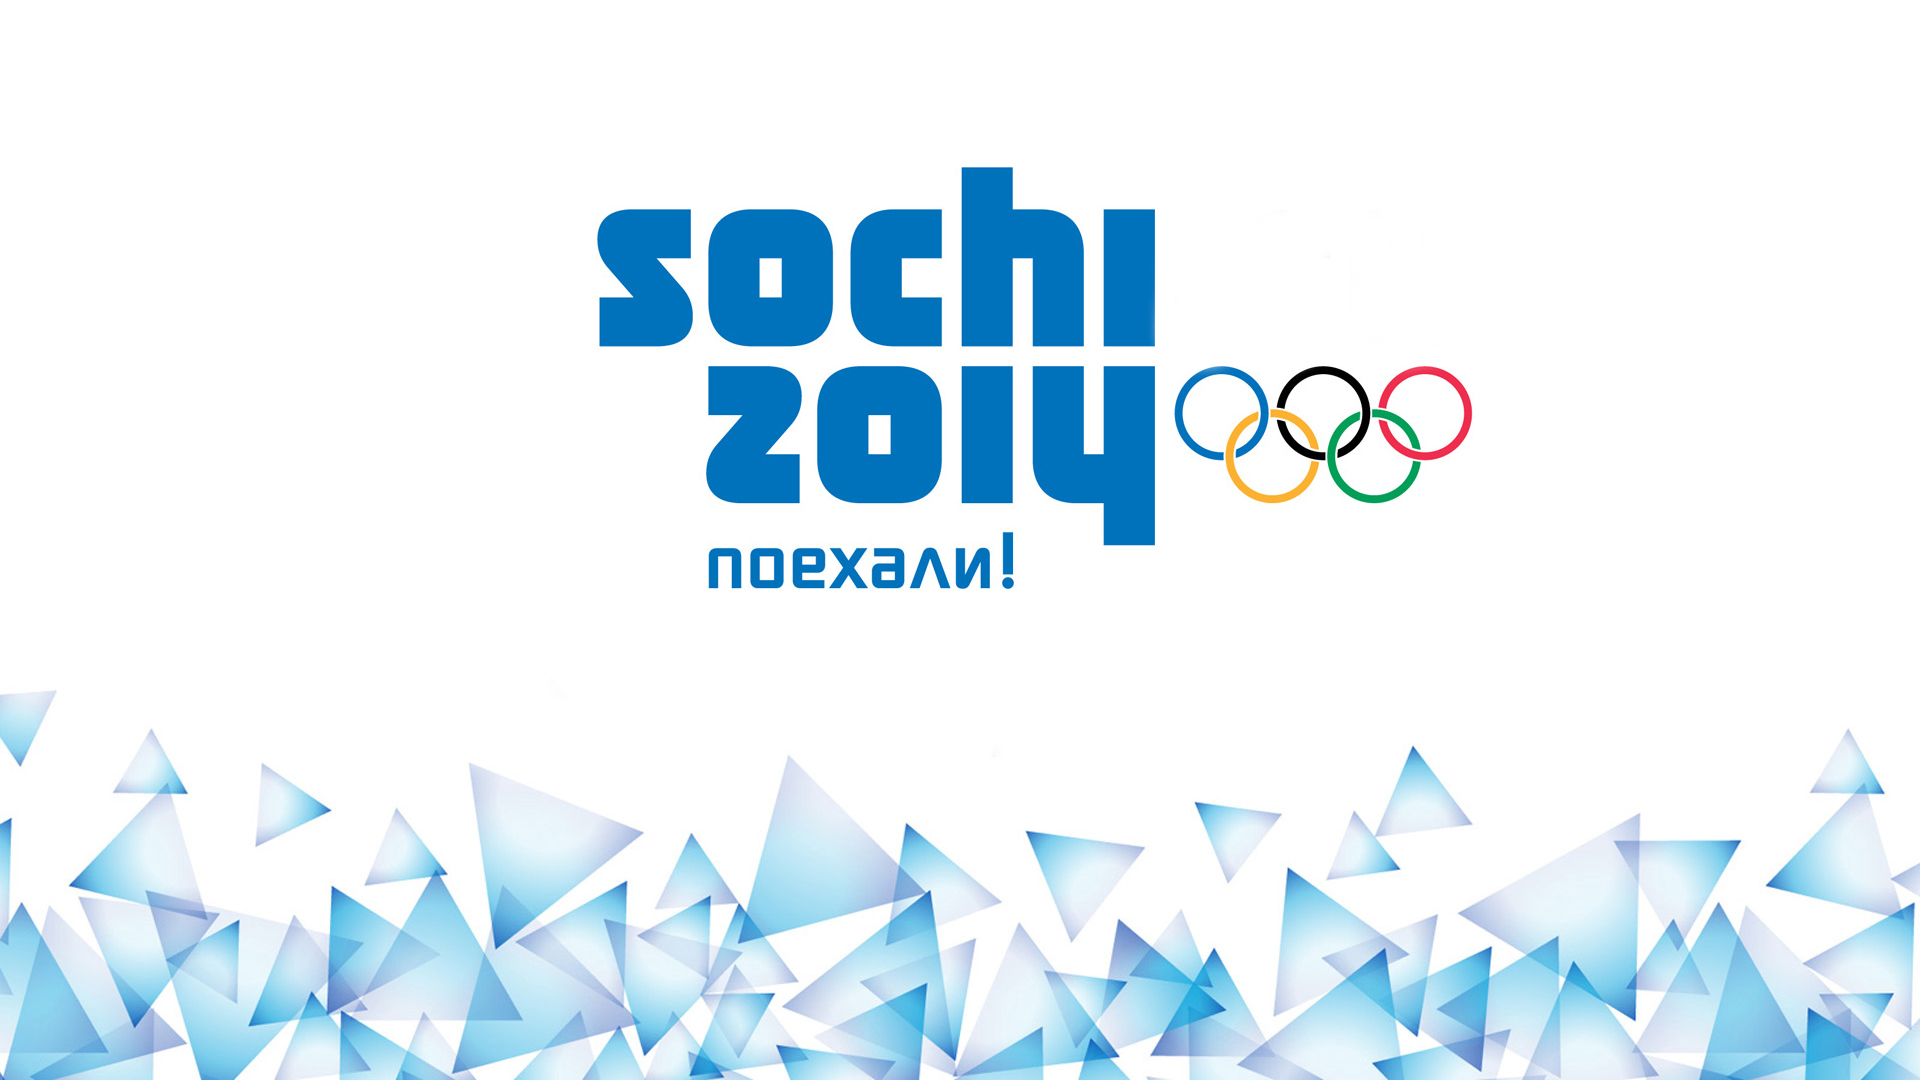 Winter Olympic Games in Sochi in 2014 wallpapers and images 